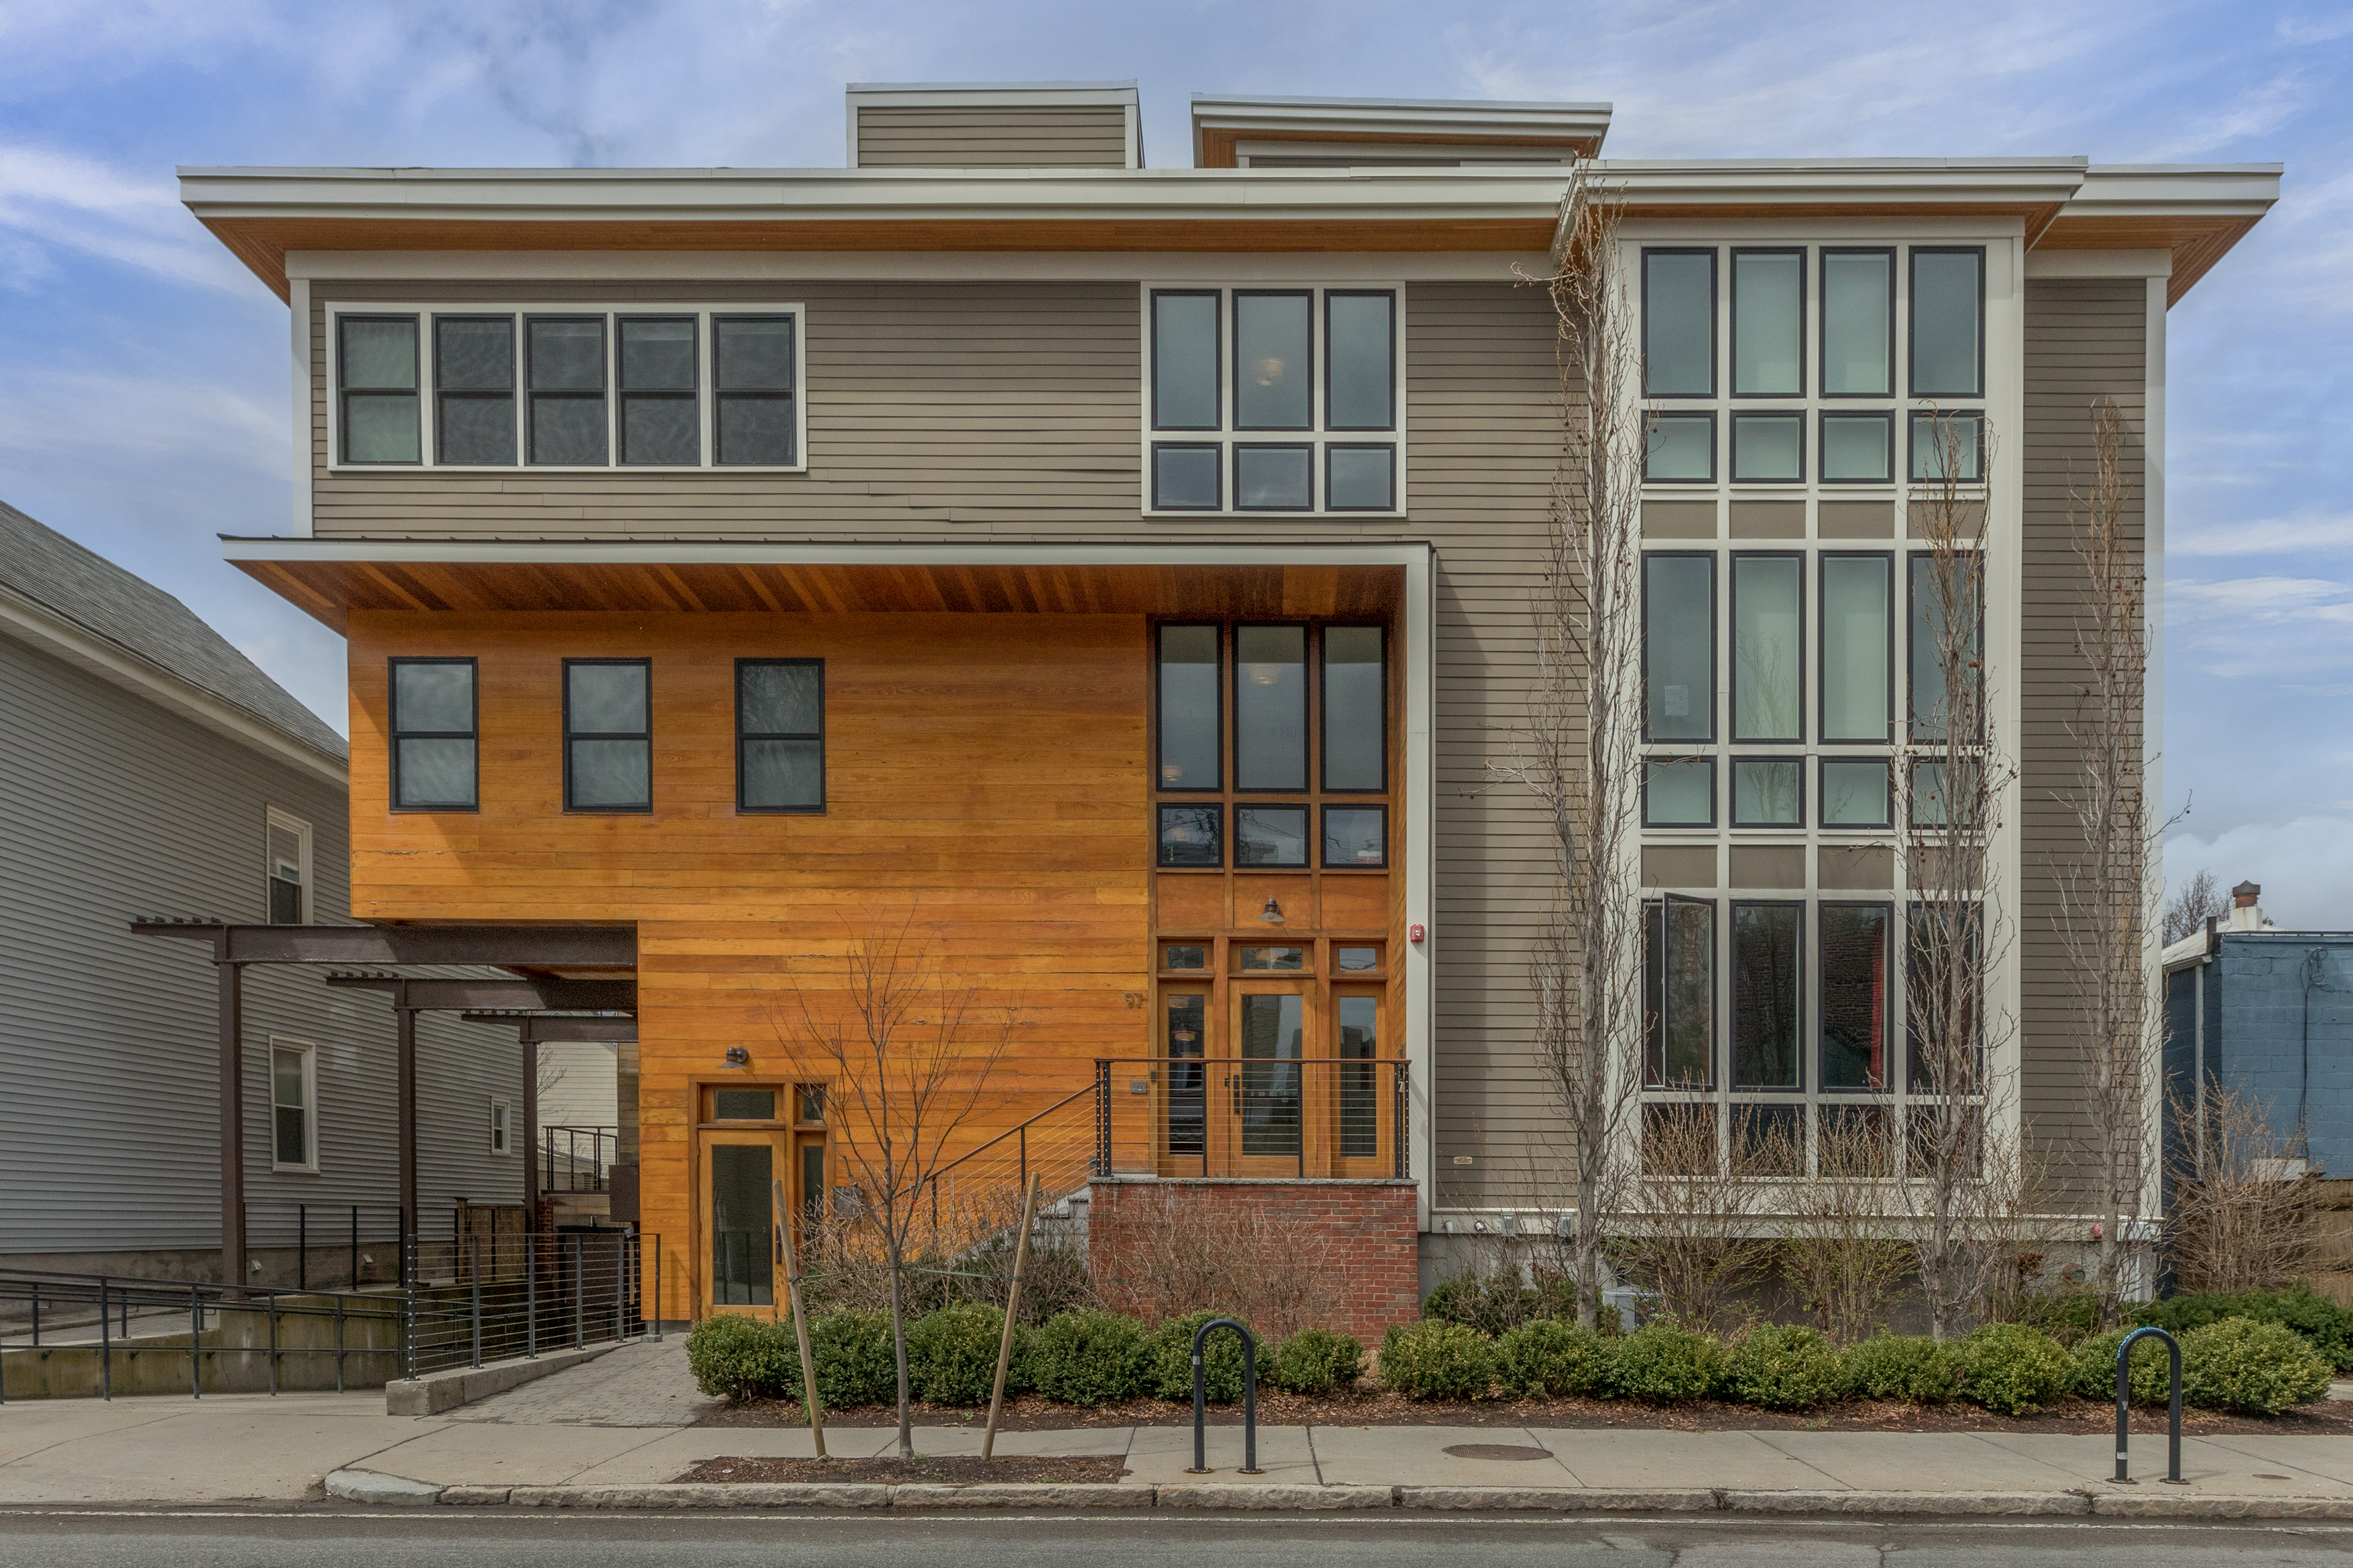 Just Listed: 3 Bedroom, 2.5 Bath Contemporary Somerville Condo